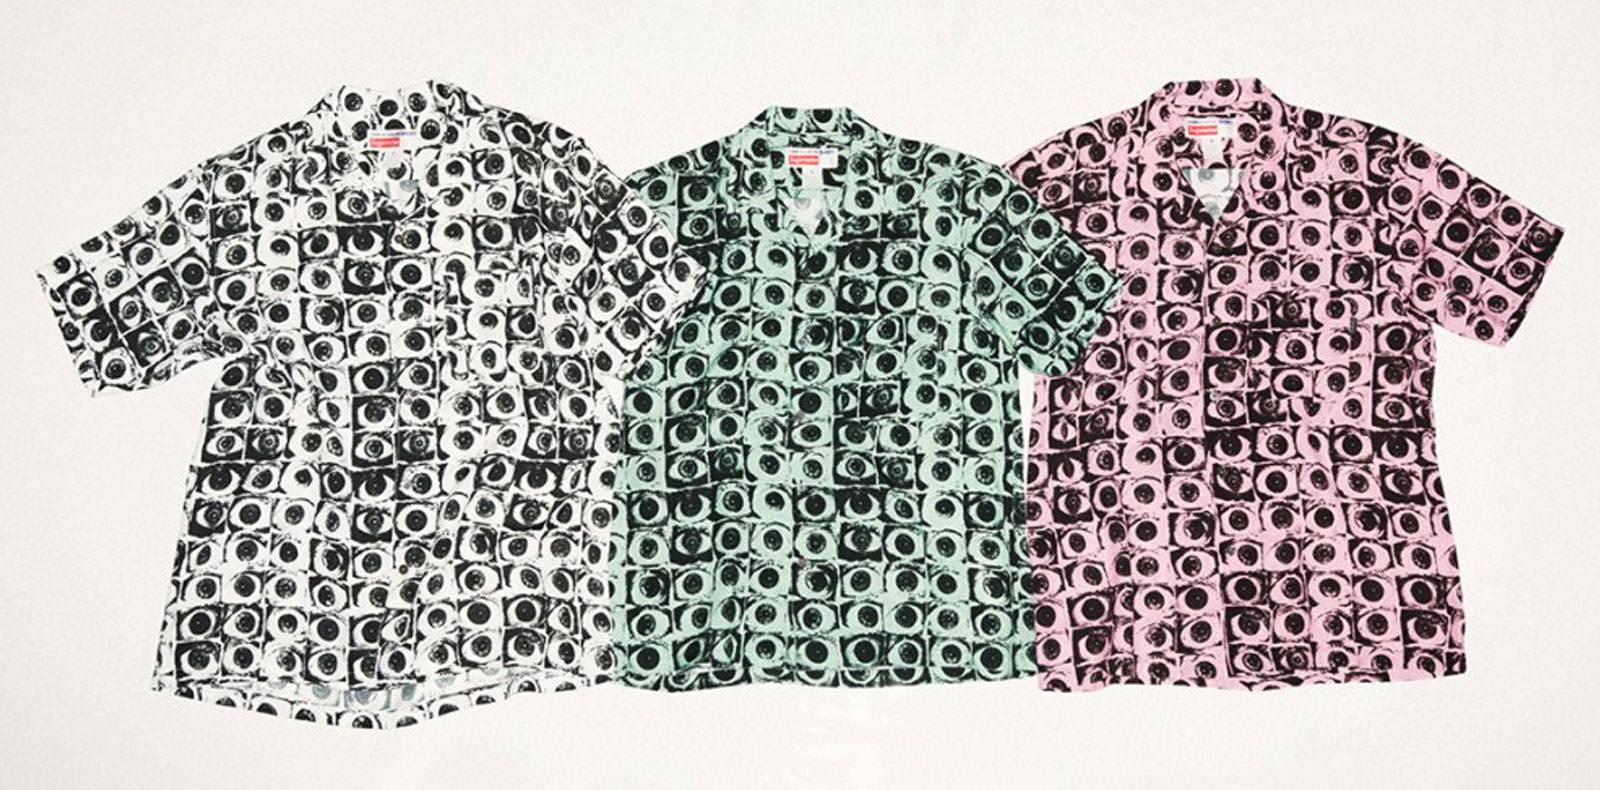 The luxurious rise of Supreme continues with Comme des Garçons